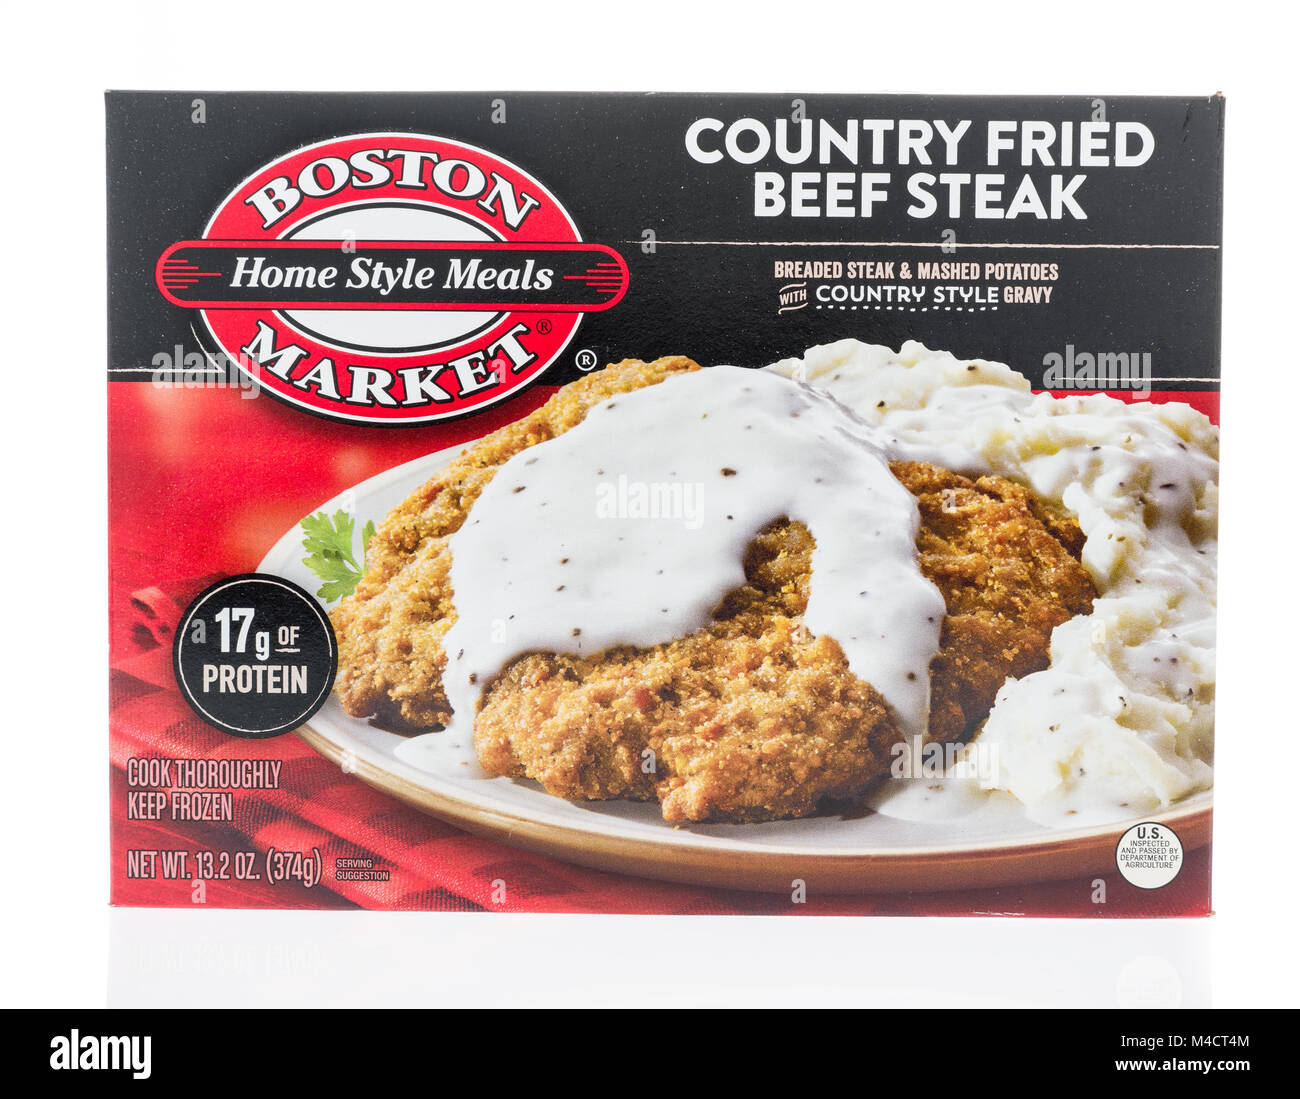 Winneconne, WI - 10 February 2018: A box of Boston Market home style meals in country fried beef steak on an isolated background. Stock Photo